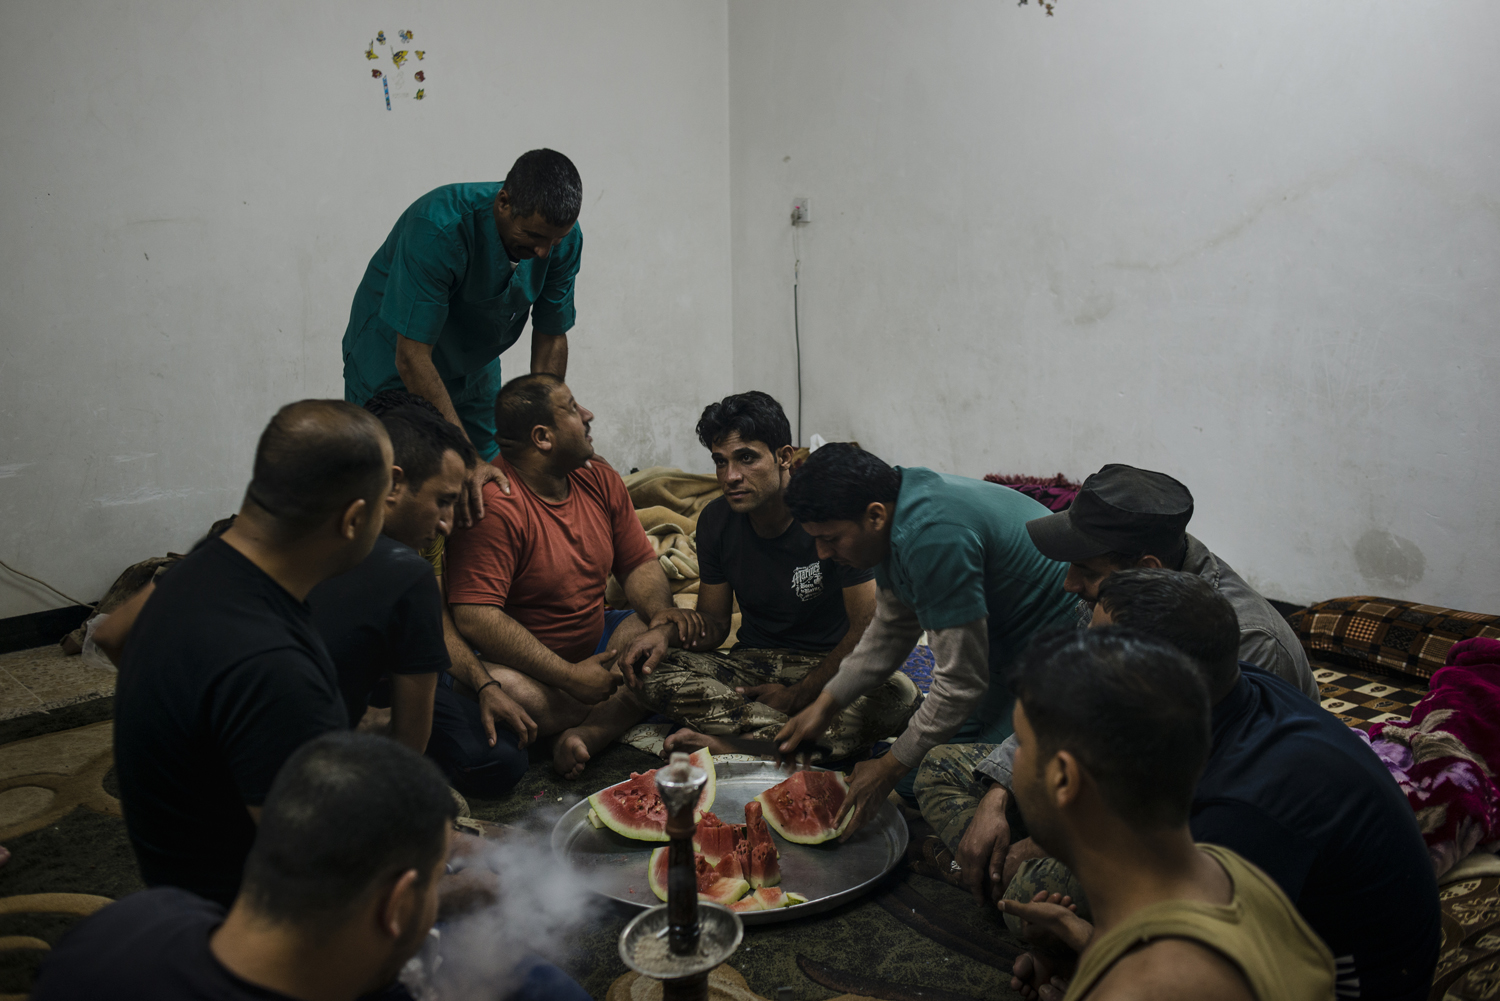 Ahmad (center) tries to resist laughing while the rest of the ISOF medics joke around after a long day of treating the wounded during the battle for Mosul, Iraq, on April 18, 2017. (Alex Potter)